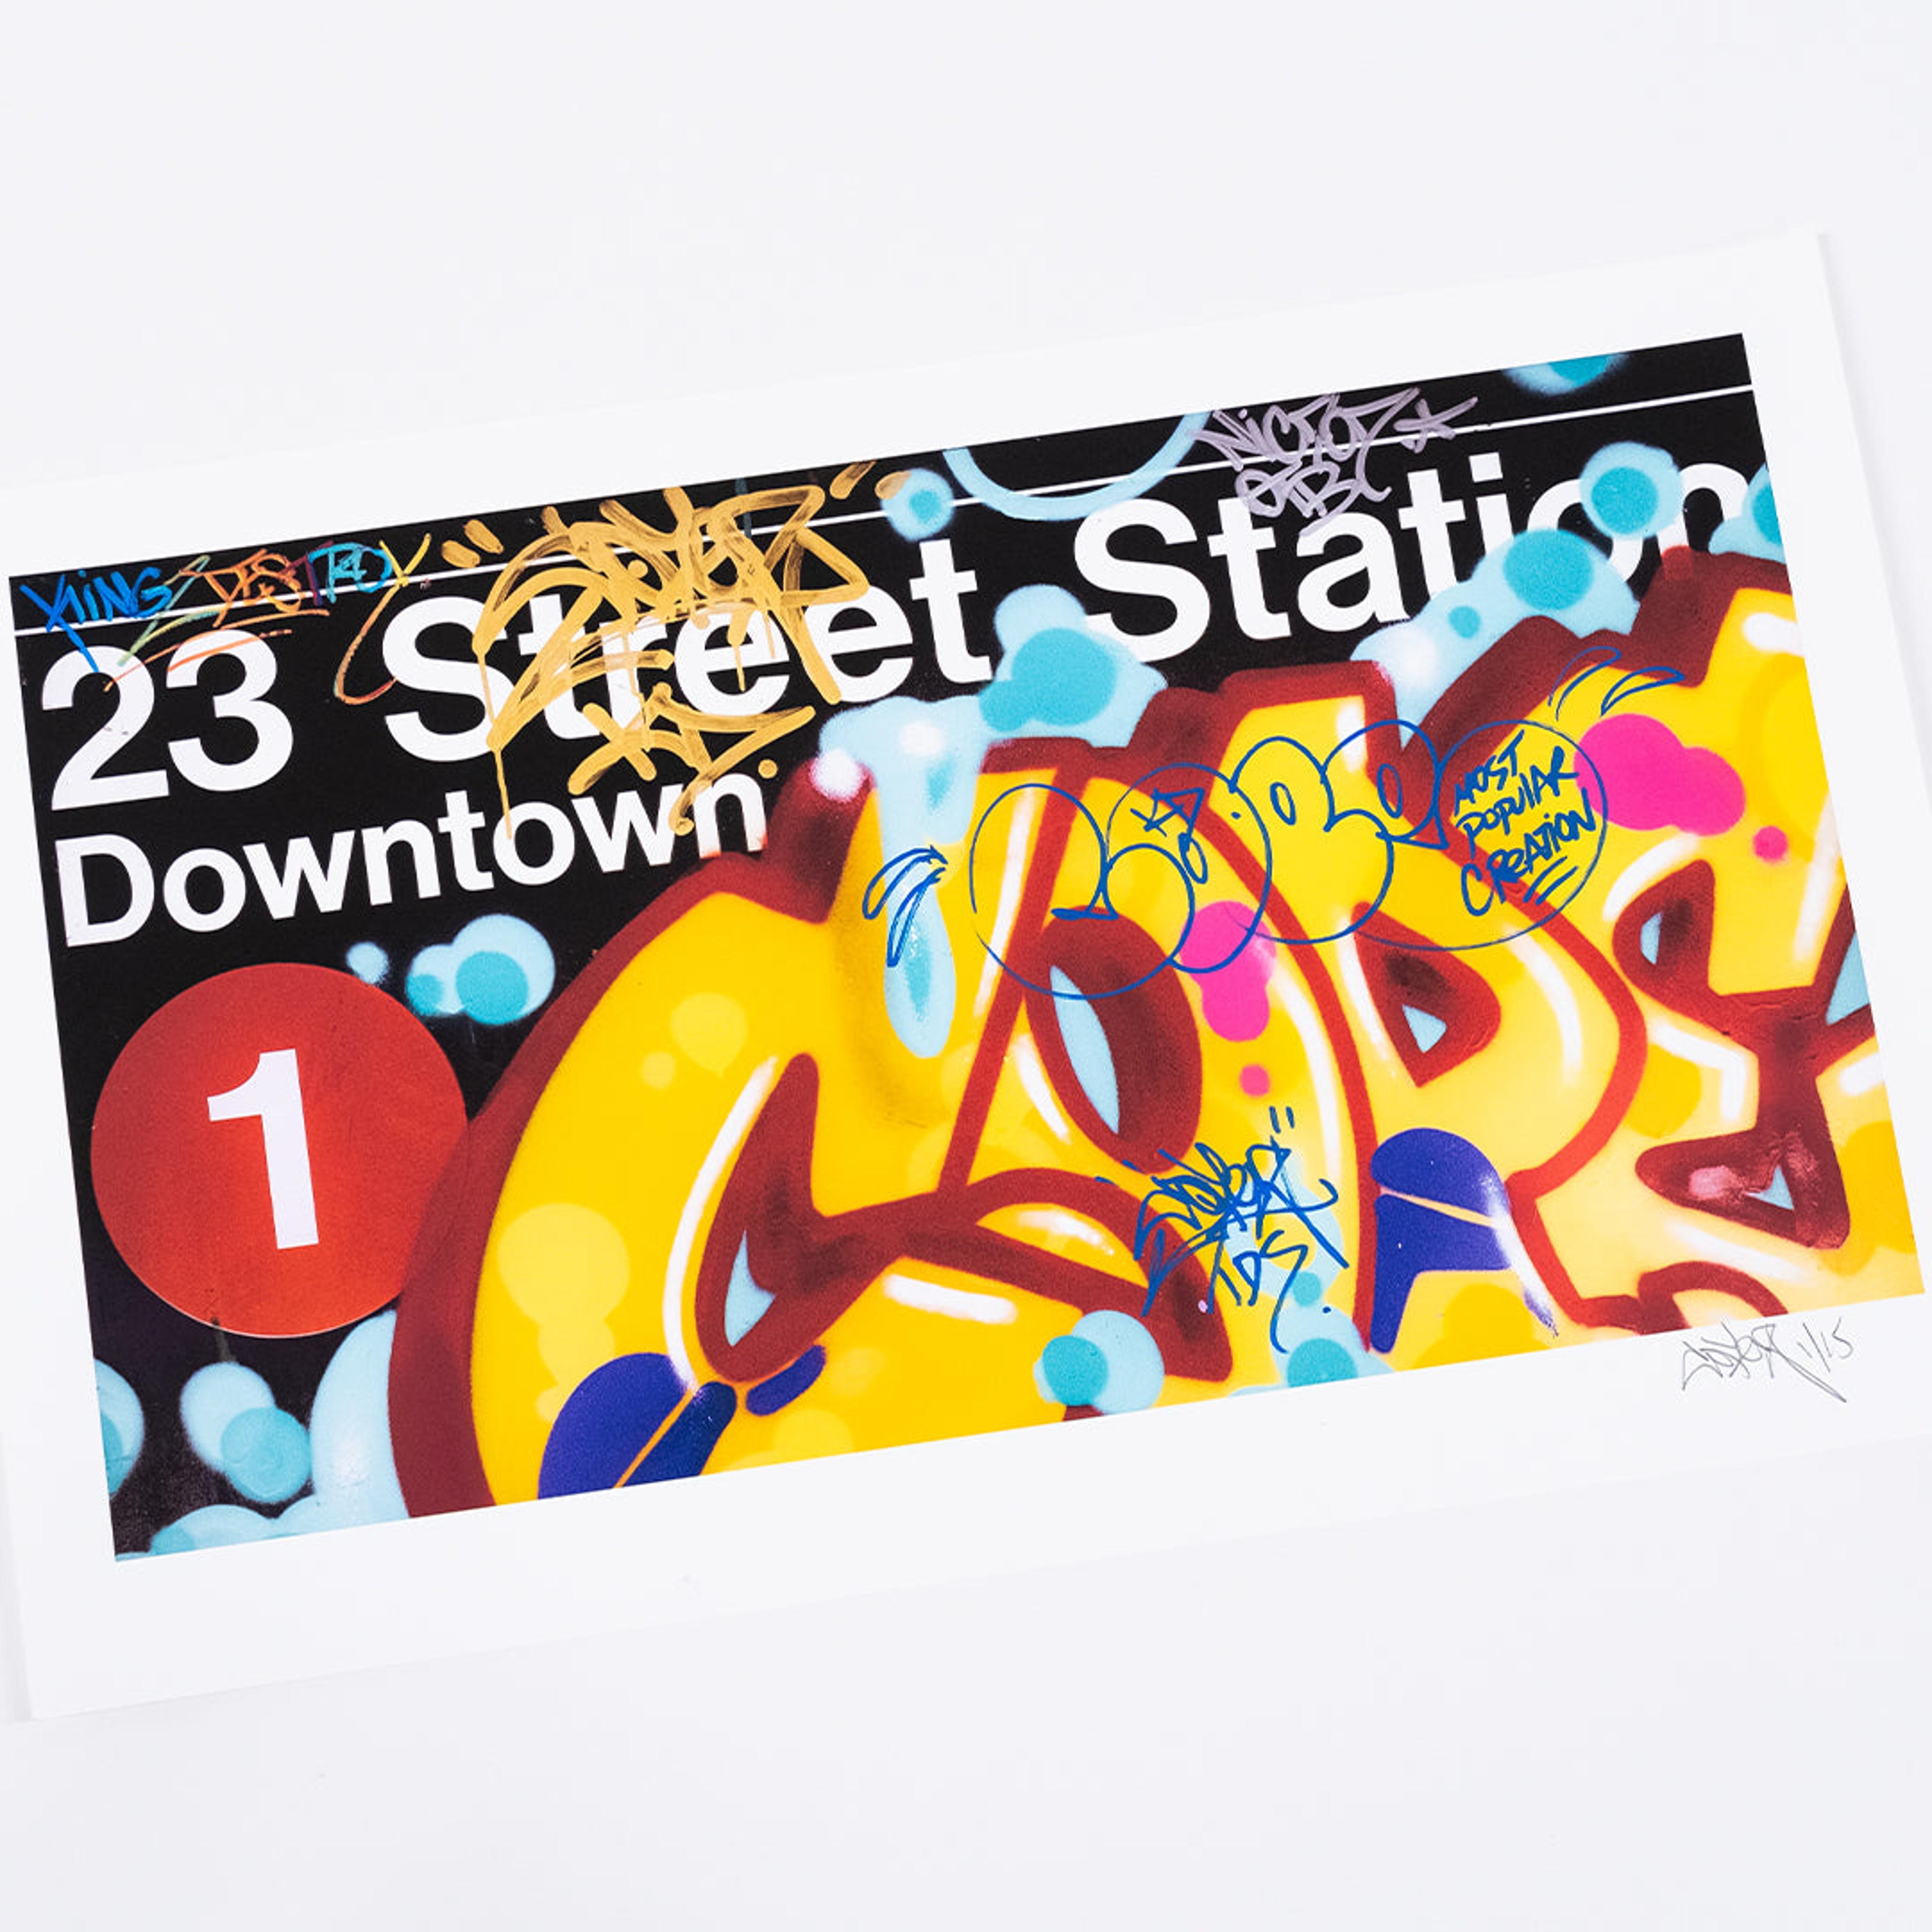 Alternate View 15 of 23rd Street Station - Hand Embellished Edition